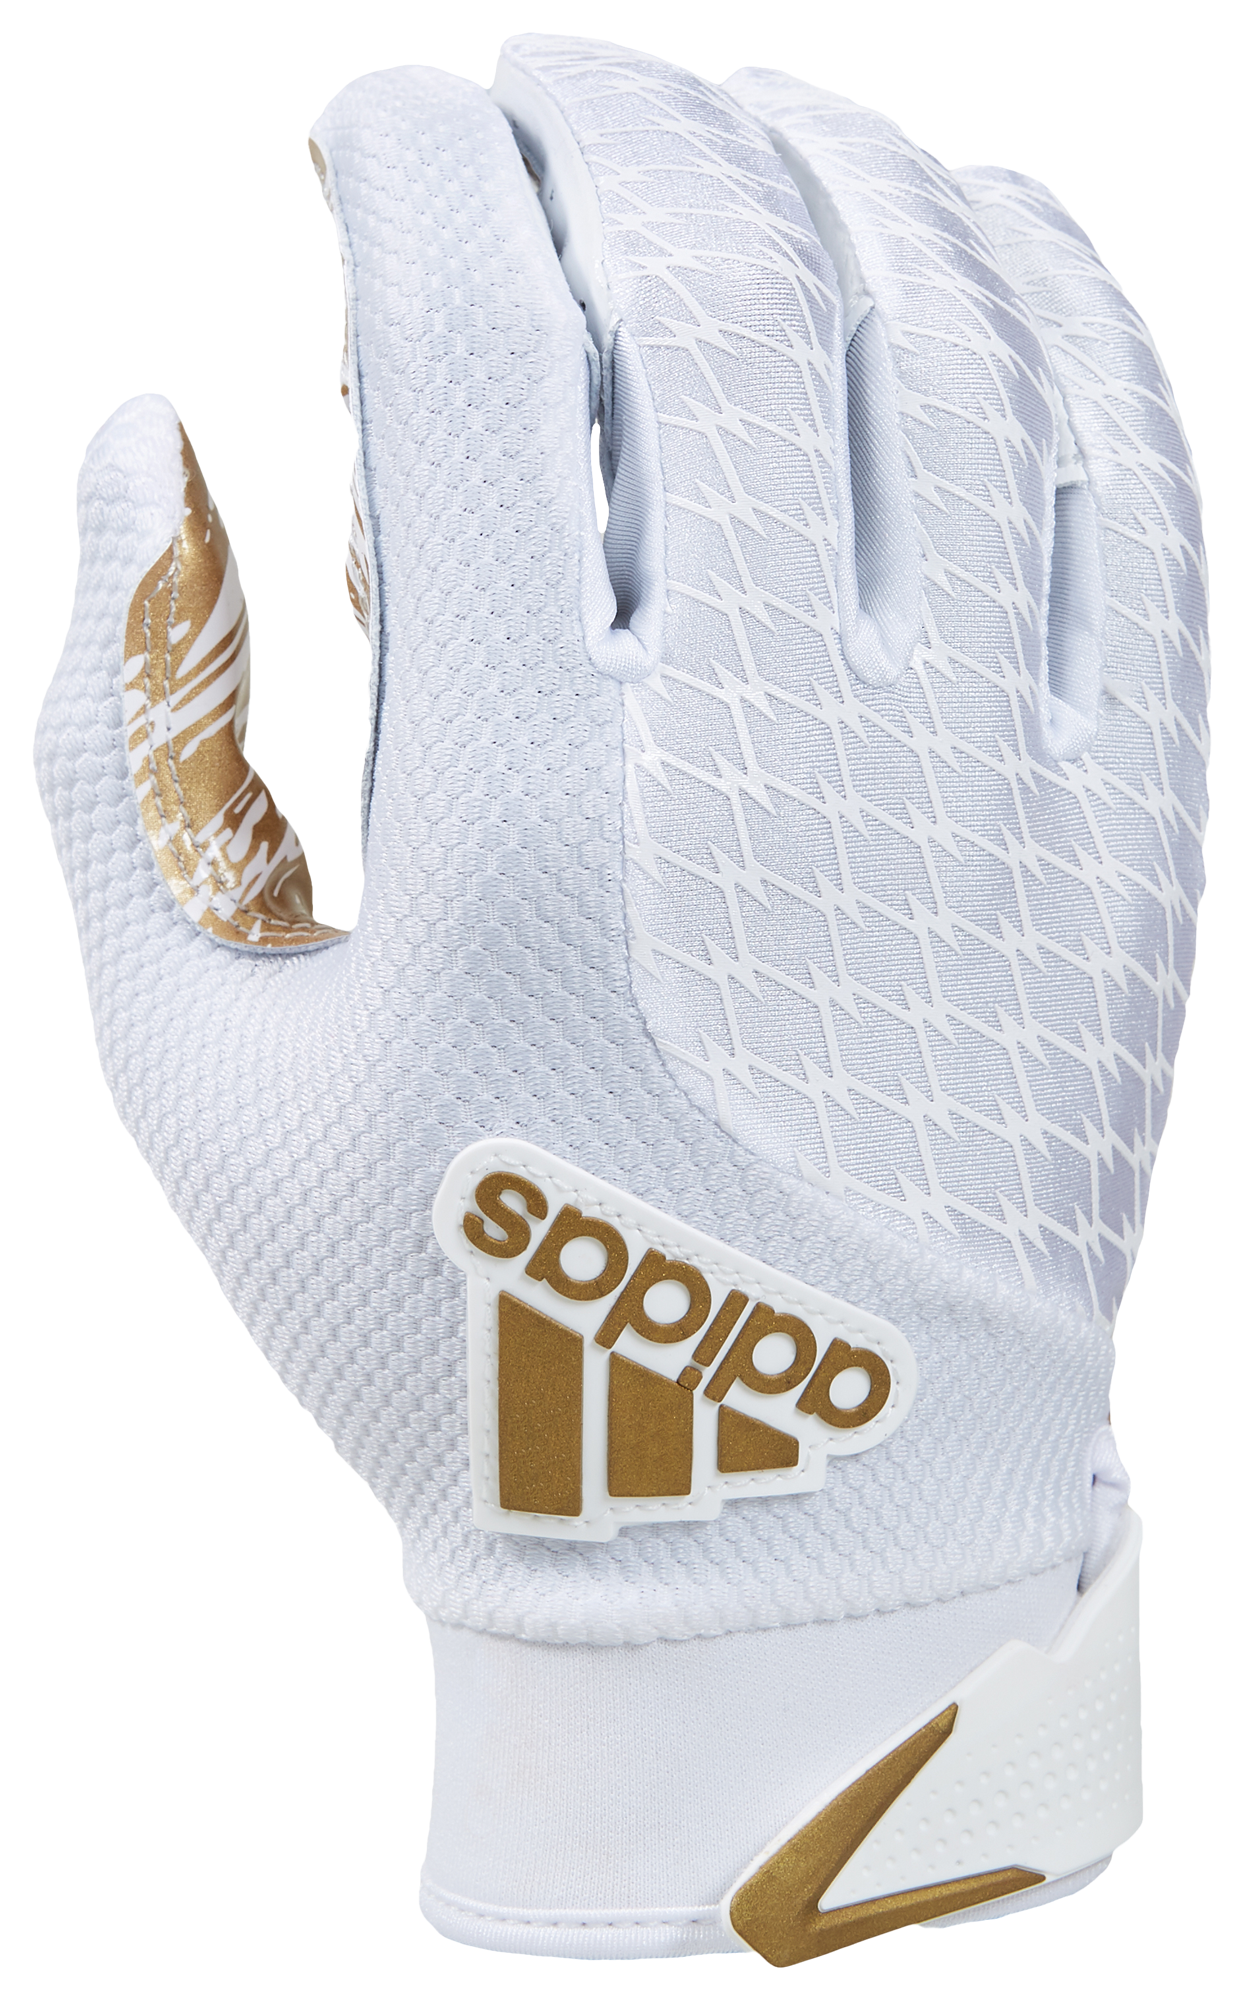 black and gold adidas gloves